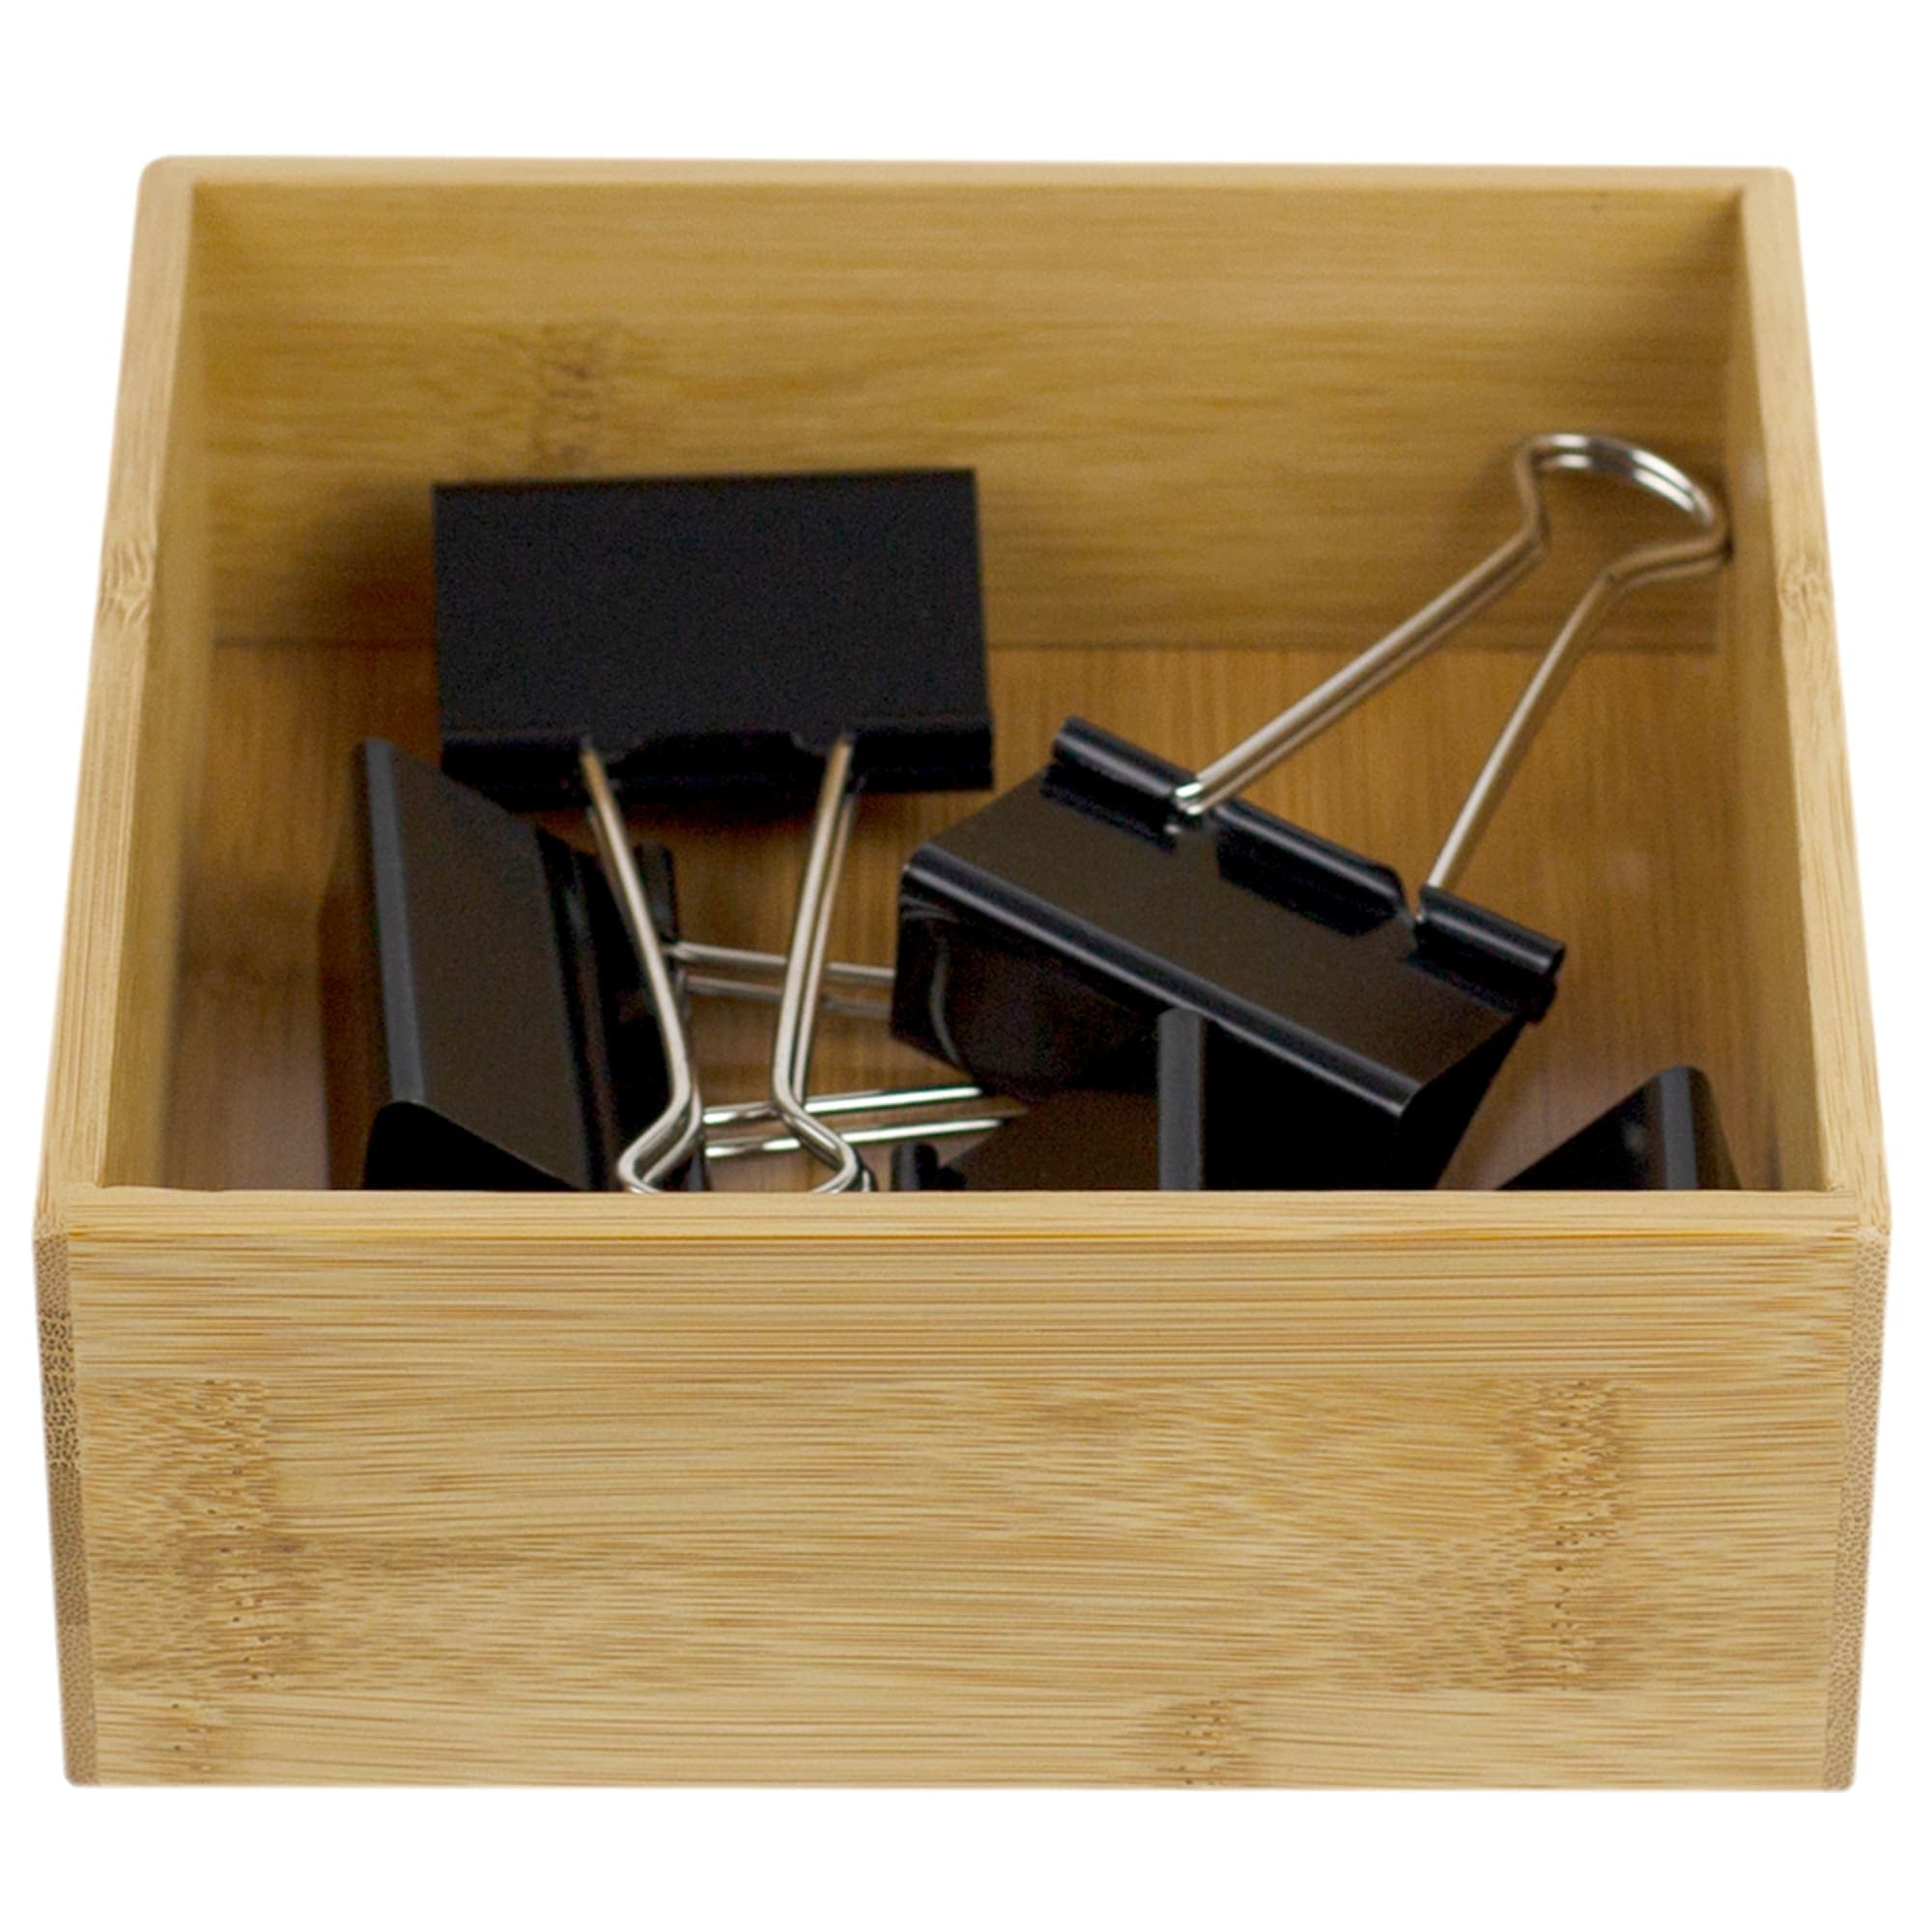 Home Basics 6" x 6" Bamboo Drawer Organizer, Natural $4.00 EACH, CASE PACK OF 12